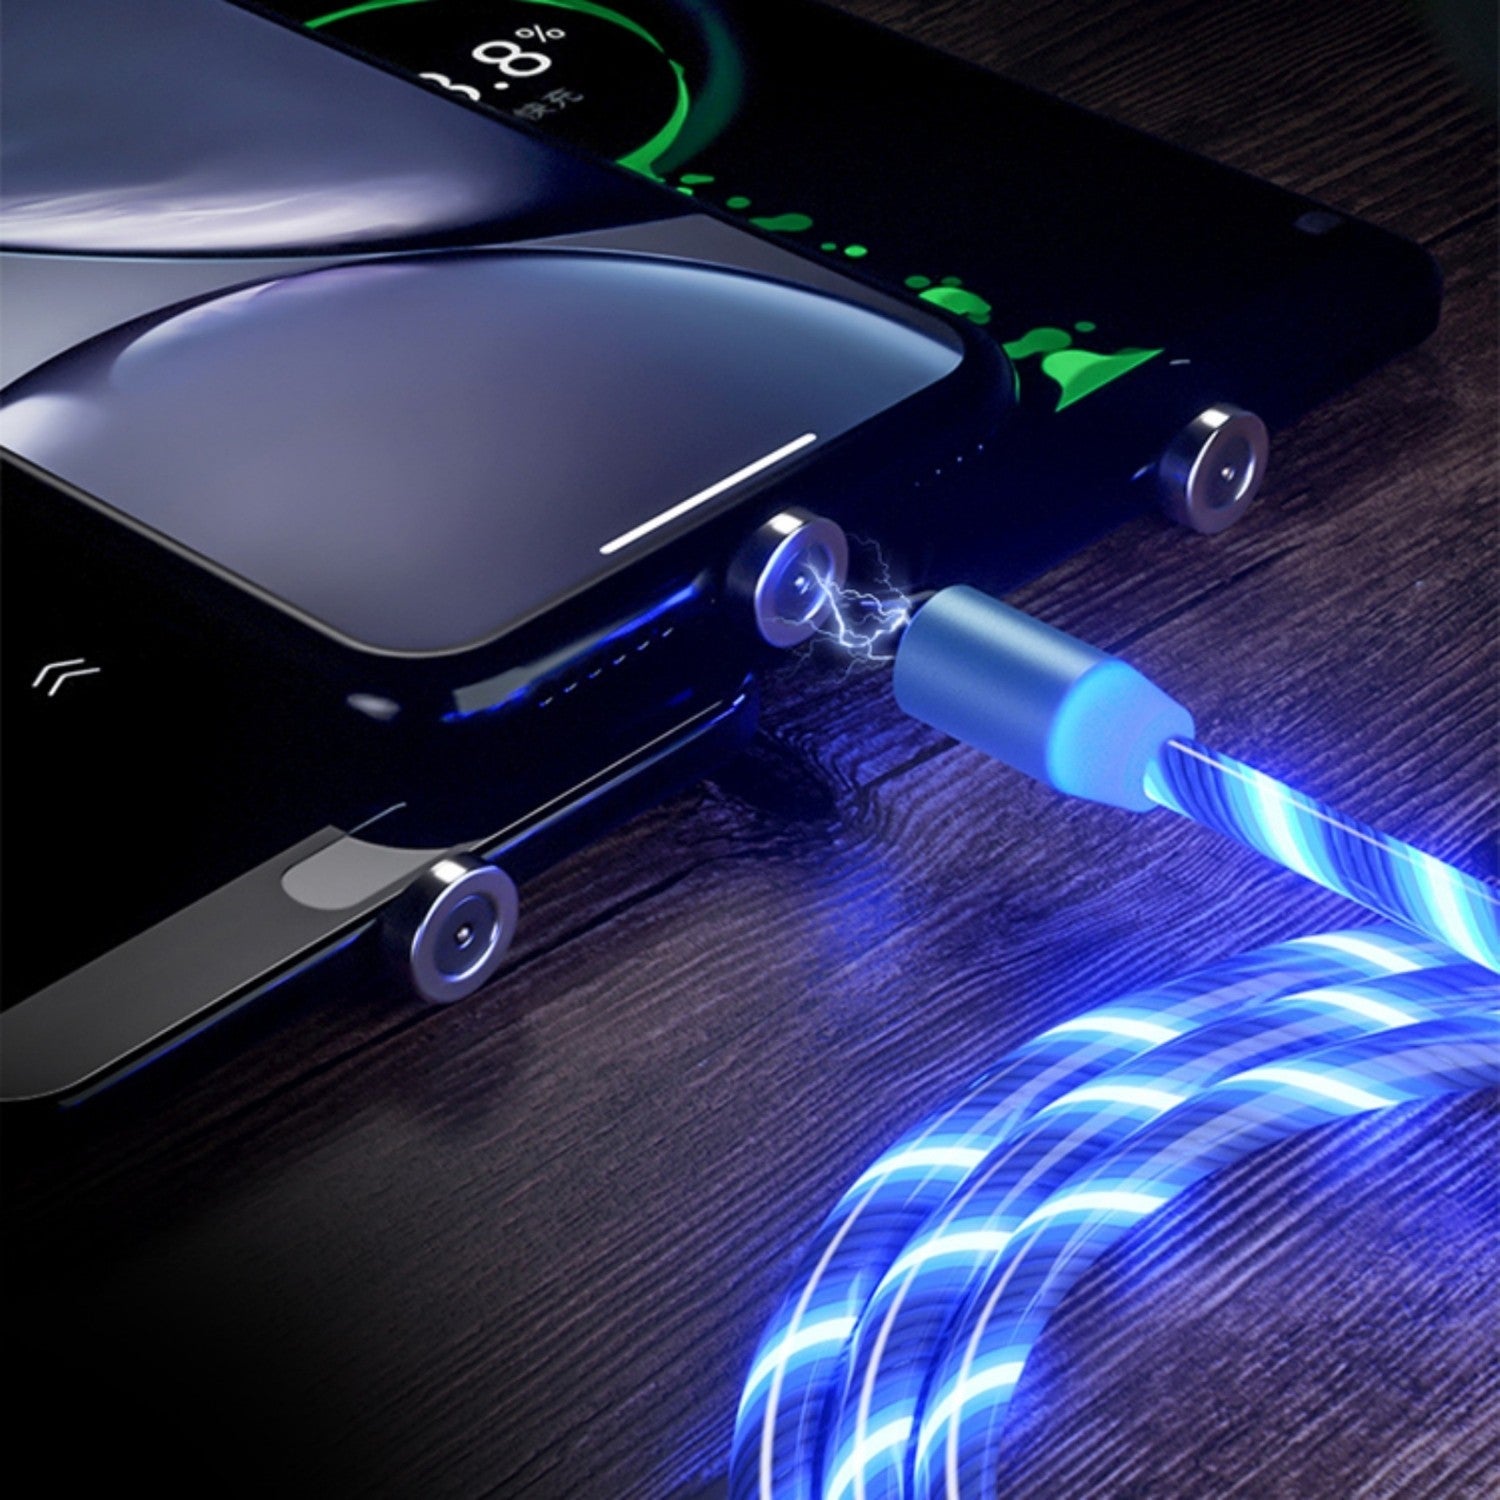 Blue Magnetic LED Phone Charger That Is Charging Three Mobile Phones